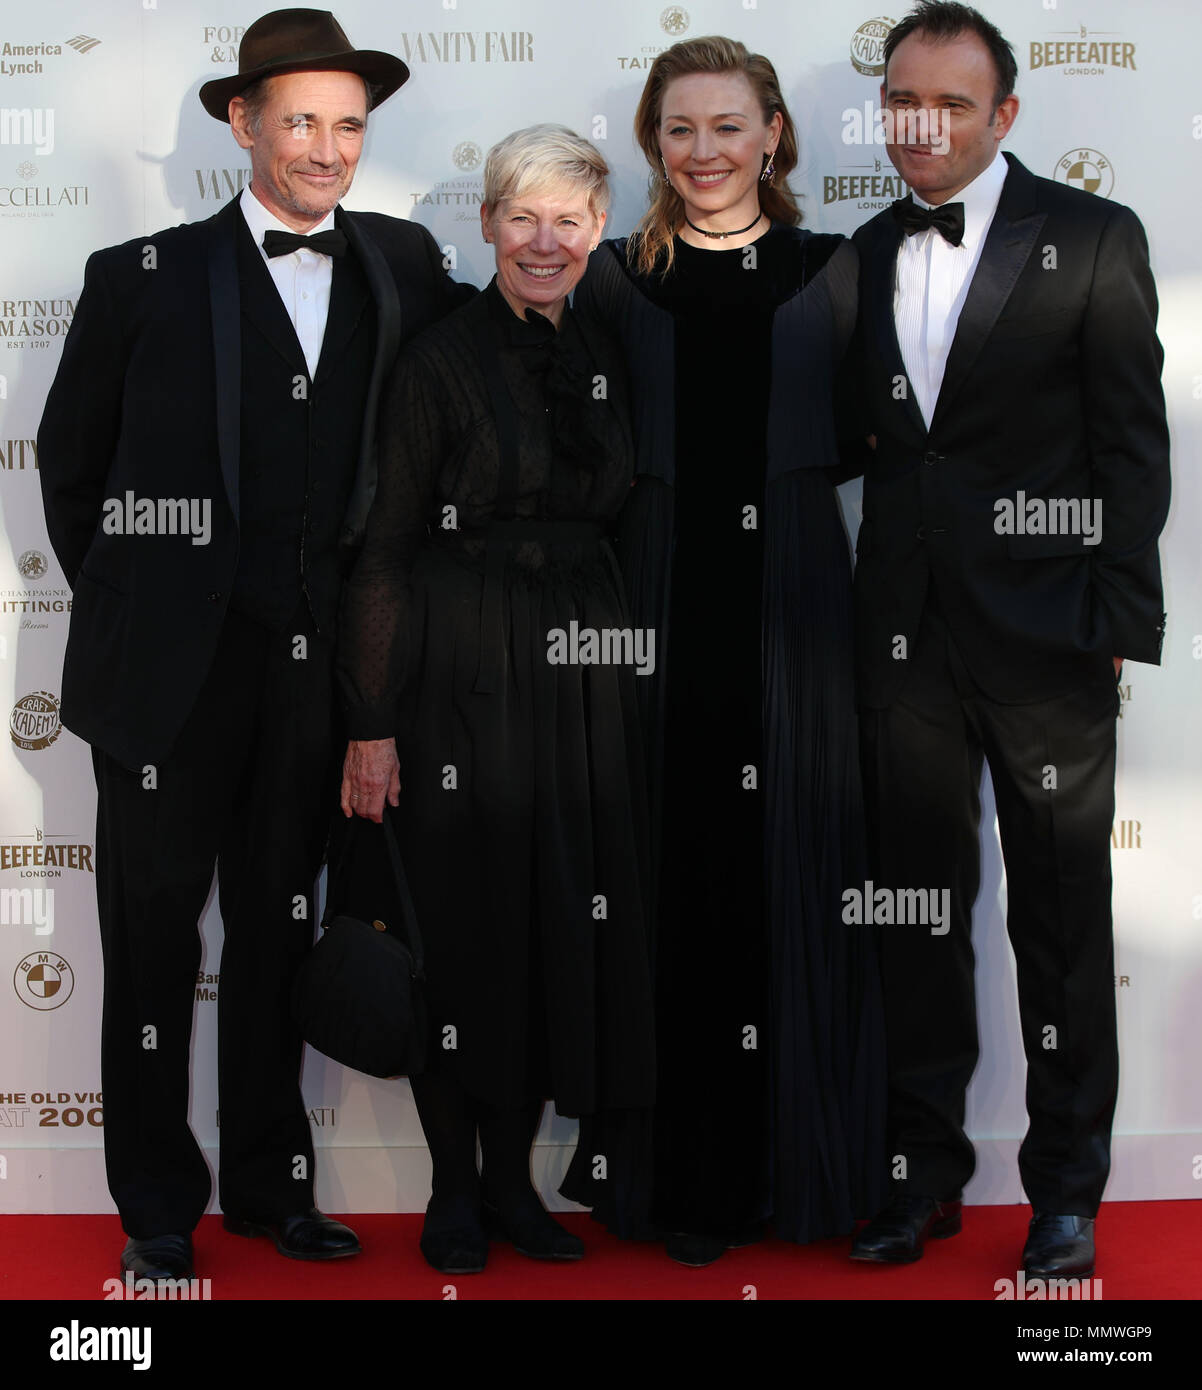 (left to right) Mark Rylance and his wife Claire van Kampen, Juliet Rylance and Matthew Warchus arriving for the Old Vic Bicentenary Ball, at the Old Vic in Lambeth, London. Stock Photo